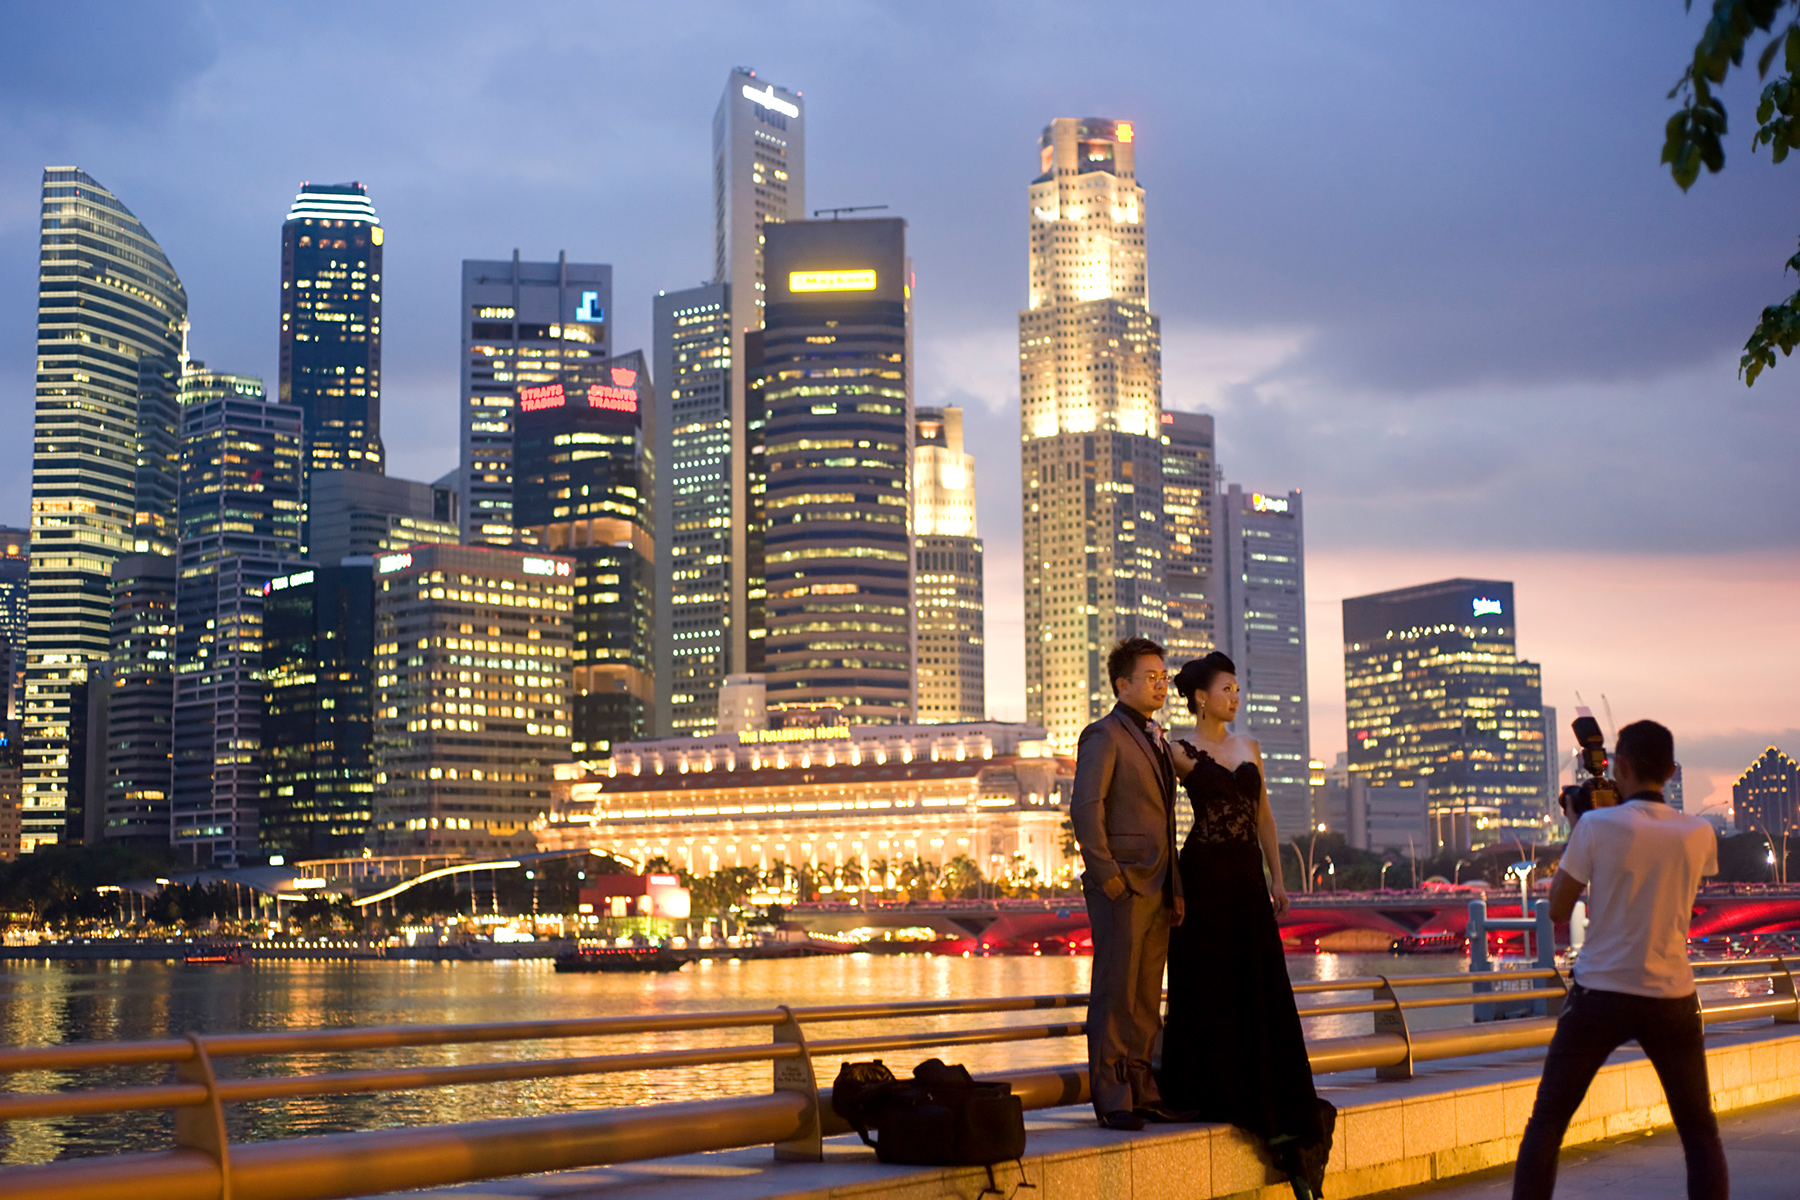 A newly married couple being photographed in front of the Singapore skyline